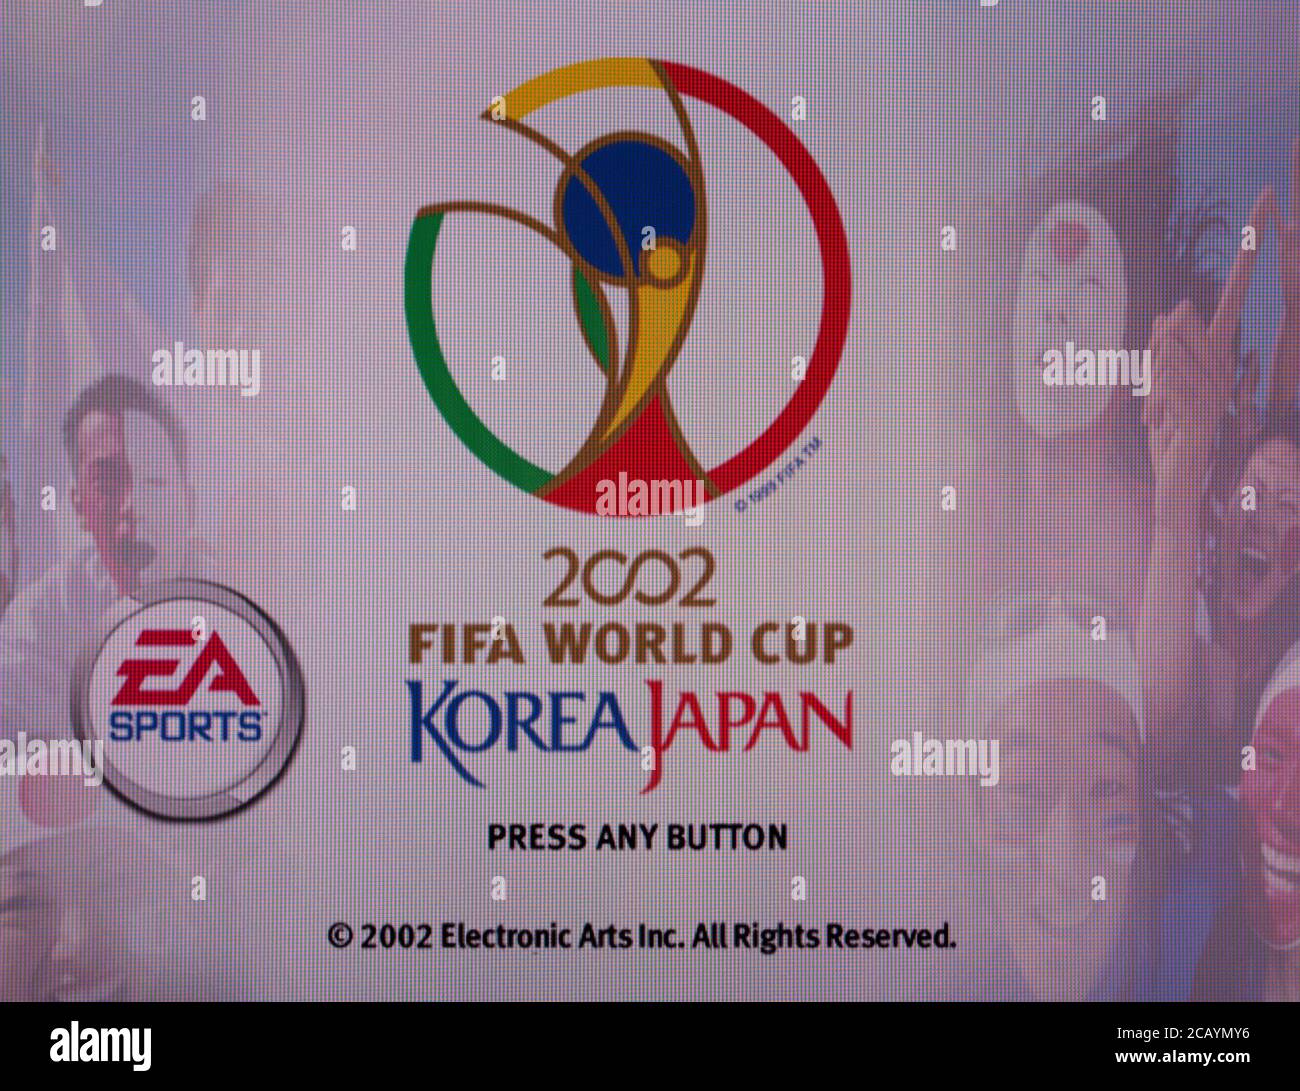 02 Fifa World Cup Ps1 Cheaper Than Retail Price Buy Clothing Accessories And Lifestyle Products For Women Men